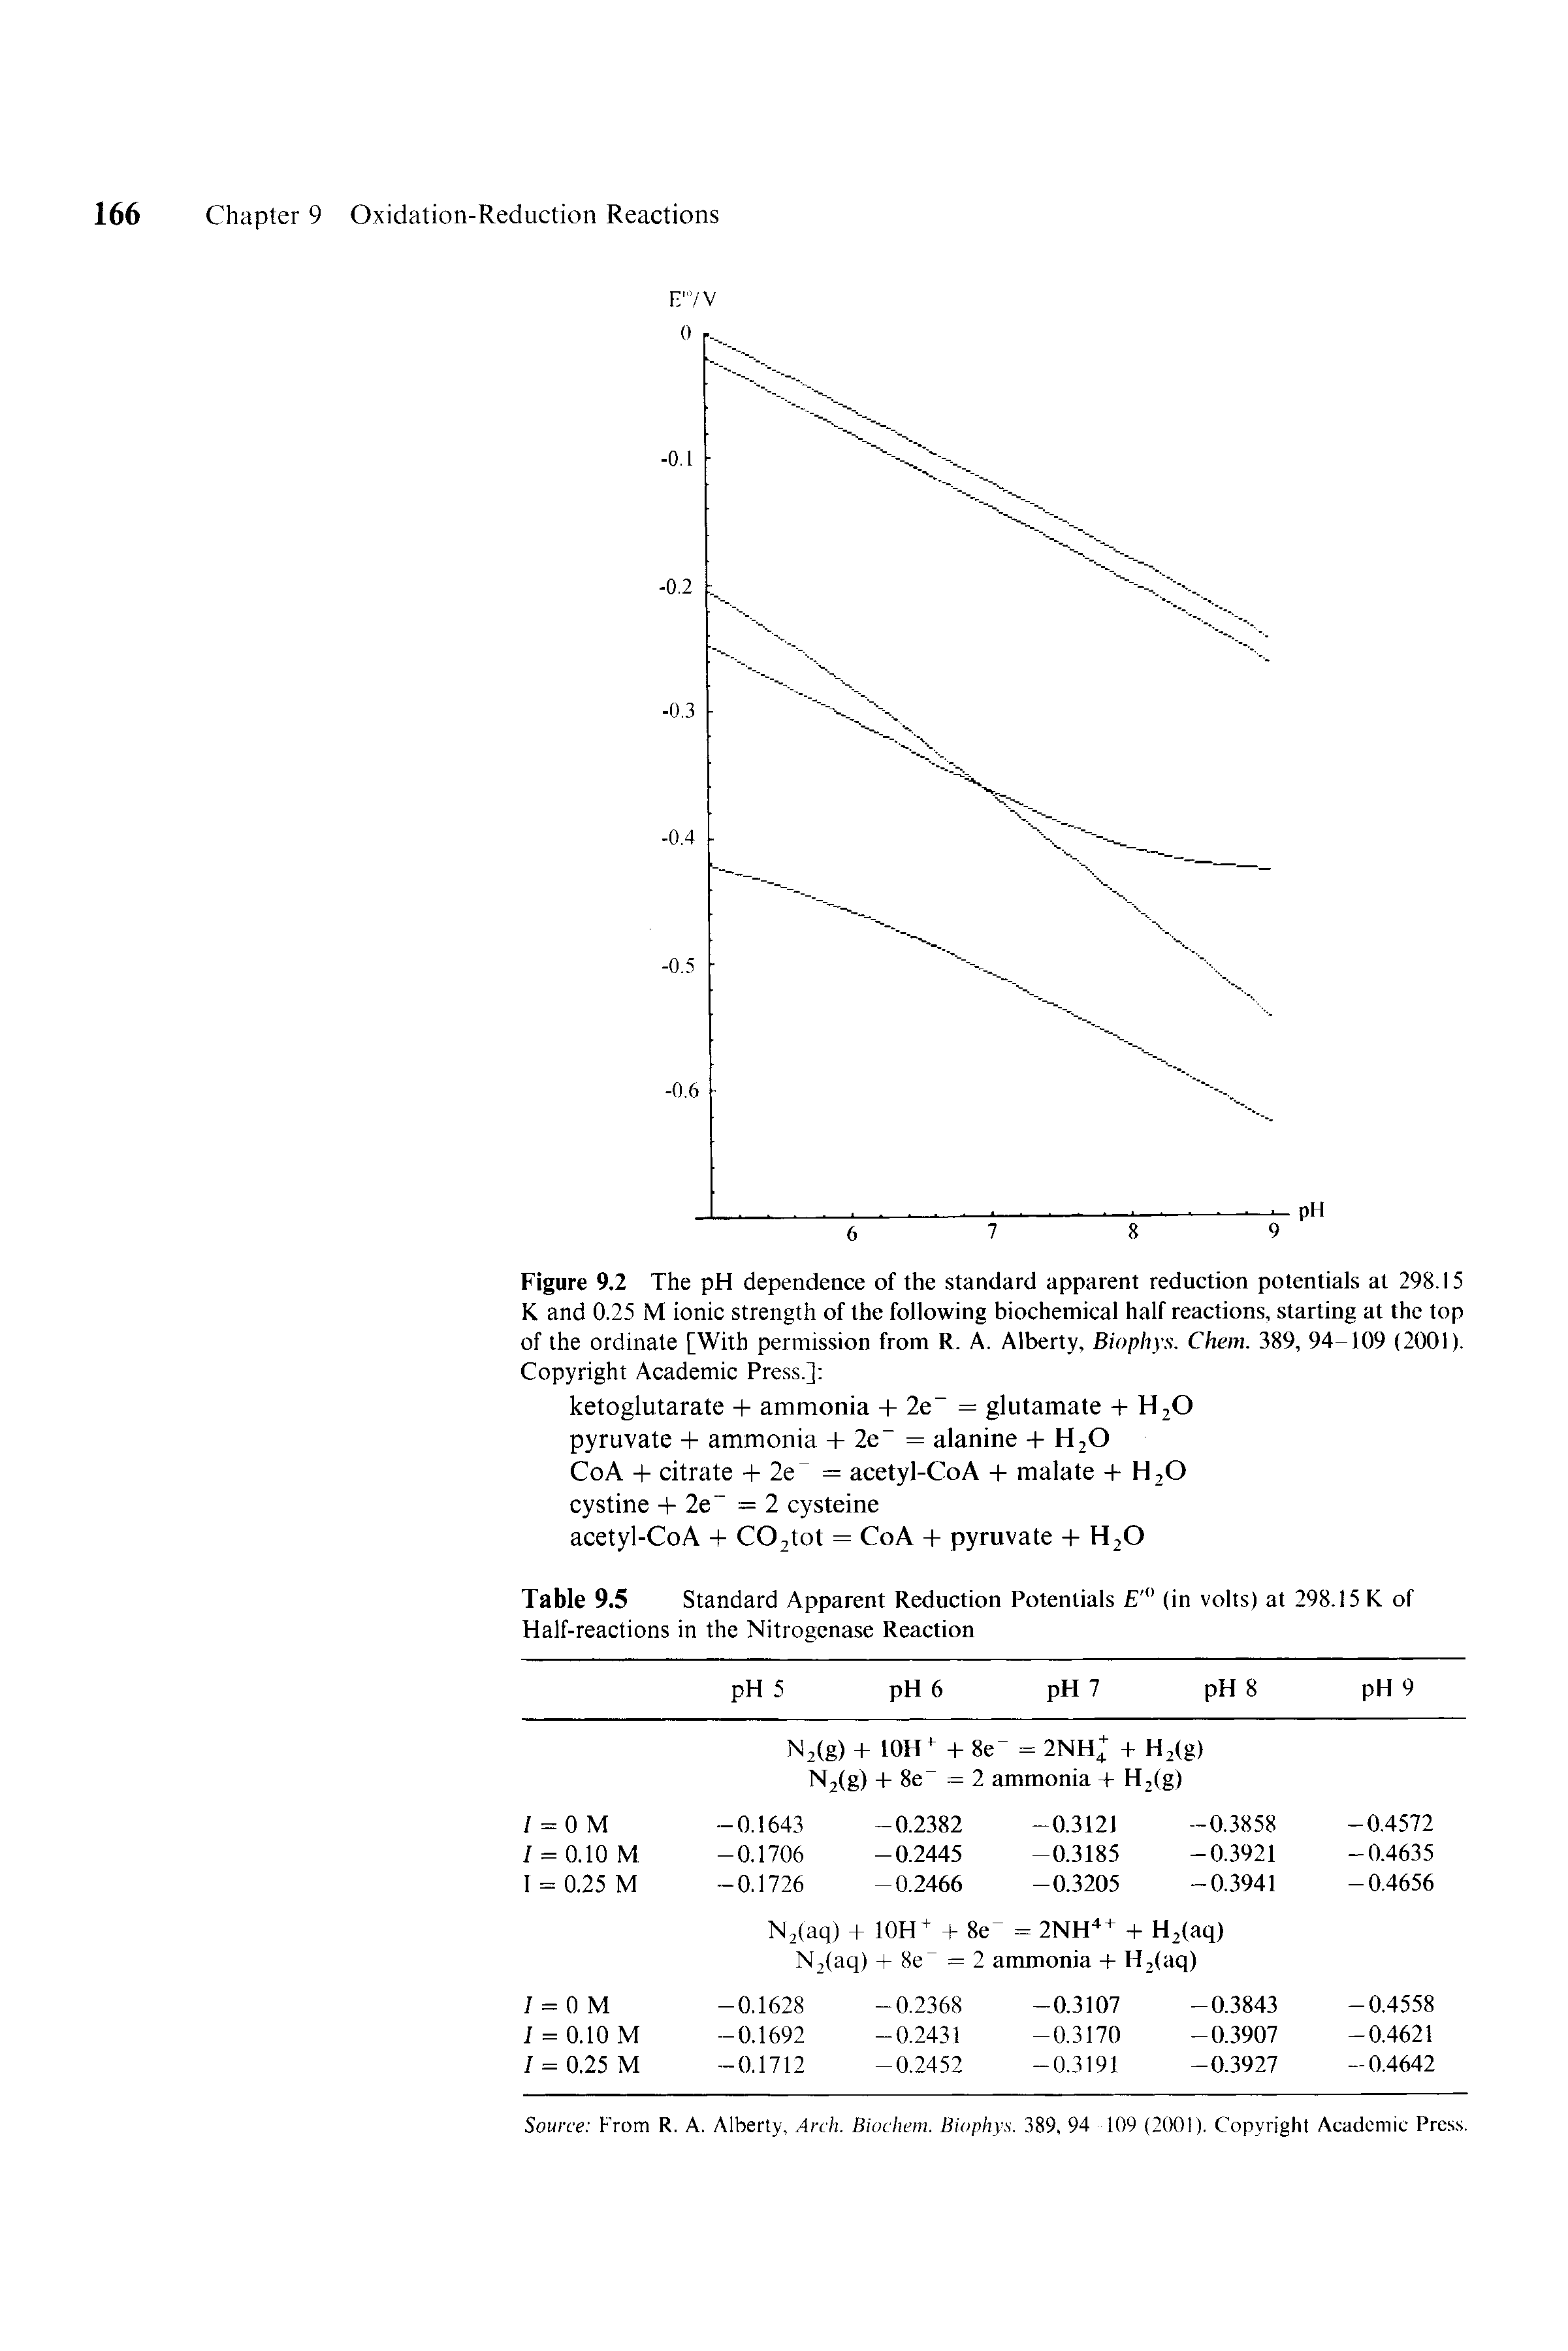 Figure 9.2 The pH dependence of the standard apparent reduction potentials at 298.15 K and 0.25 M ionic strength of the following biochemical half reactions, starting at the top of the ordinate [With permission from R. A. Alberty, Biophys. Chem. 389, 94-109 (2001). Copyright Academic Press.] ...